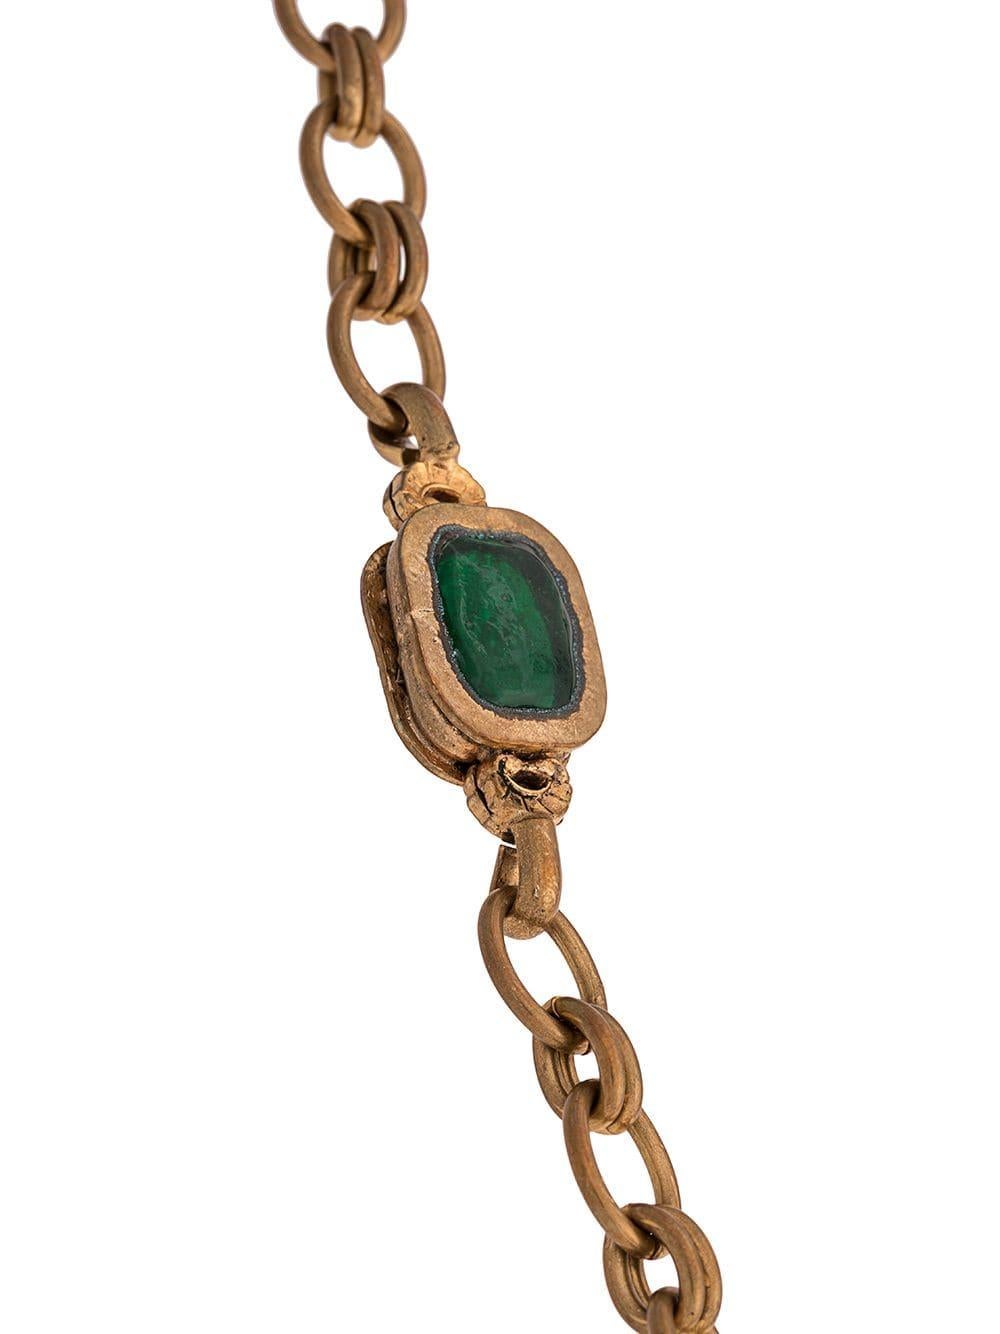 Crafted in France, this elegant, pre-owned necklace from Chanel is a unique piece that adds a touch of classic sophistication to any outfit and features an intricate combination of antique gold-toned brass hardware, ruby red and green gripoix glass